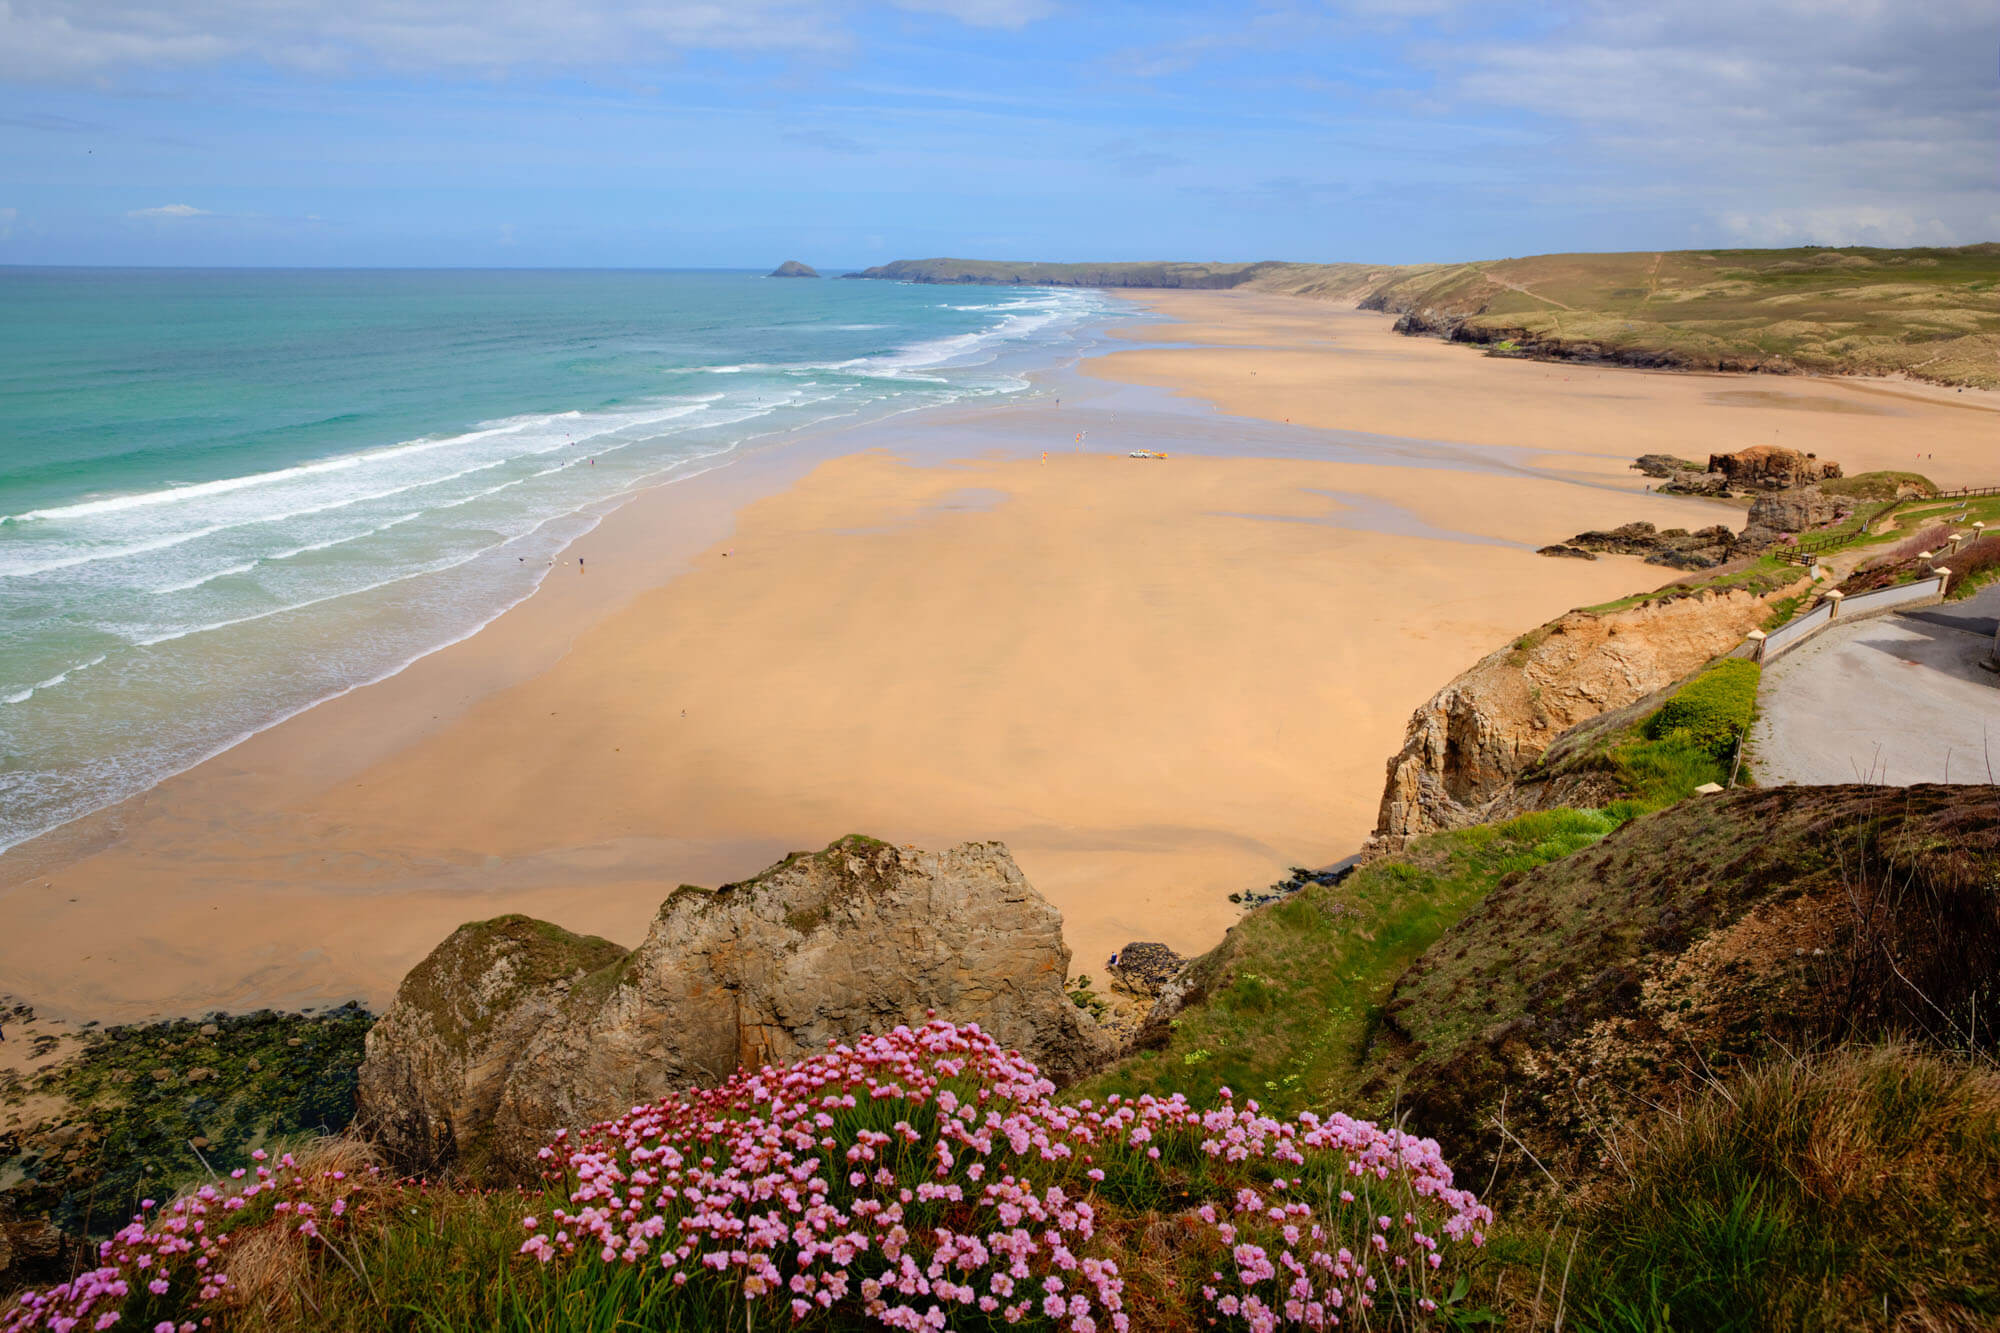 The view from the coastal path across Perranporth beach, with a huge sandy shore and flowers on the rocky cliffs.